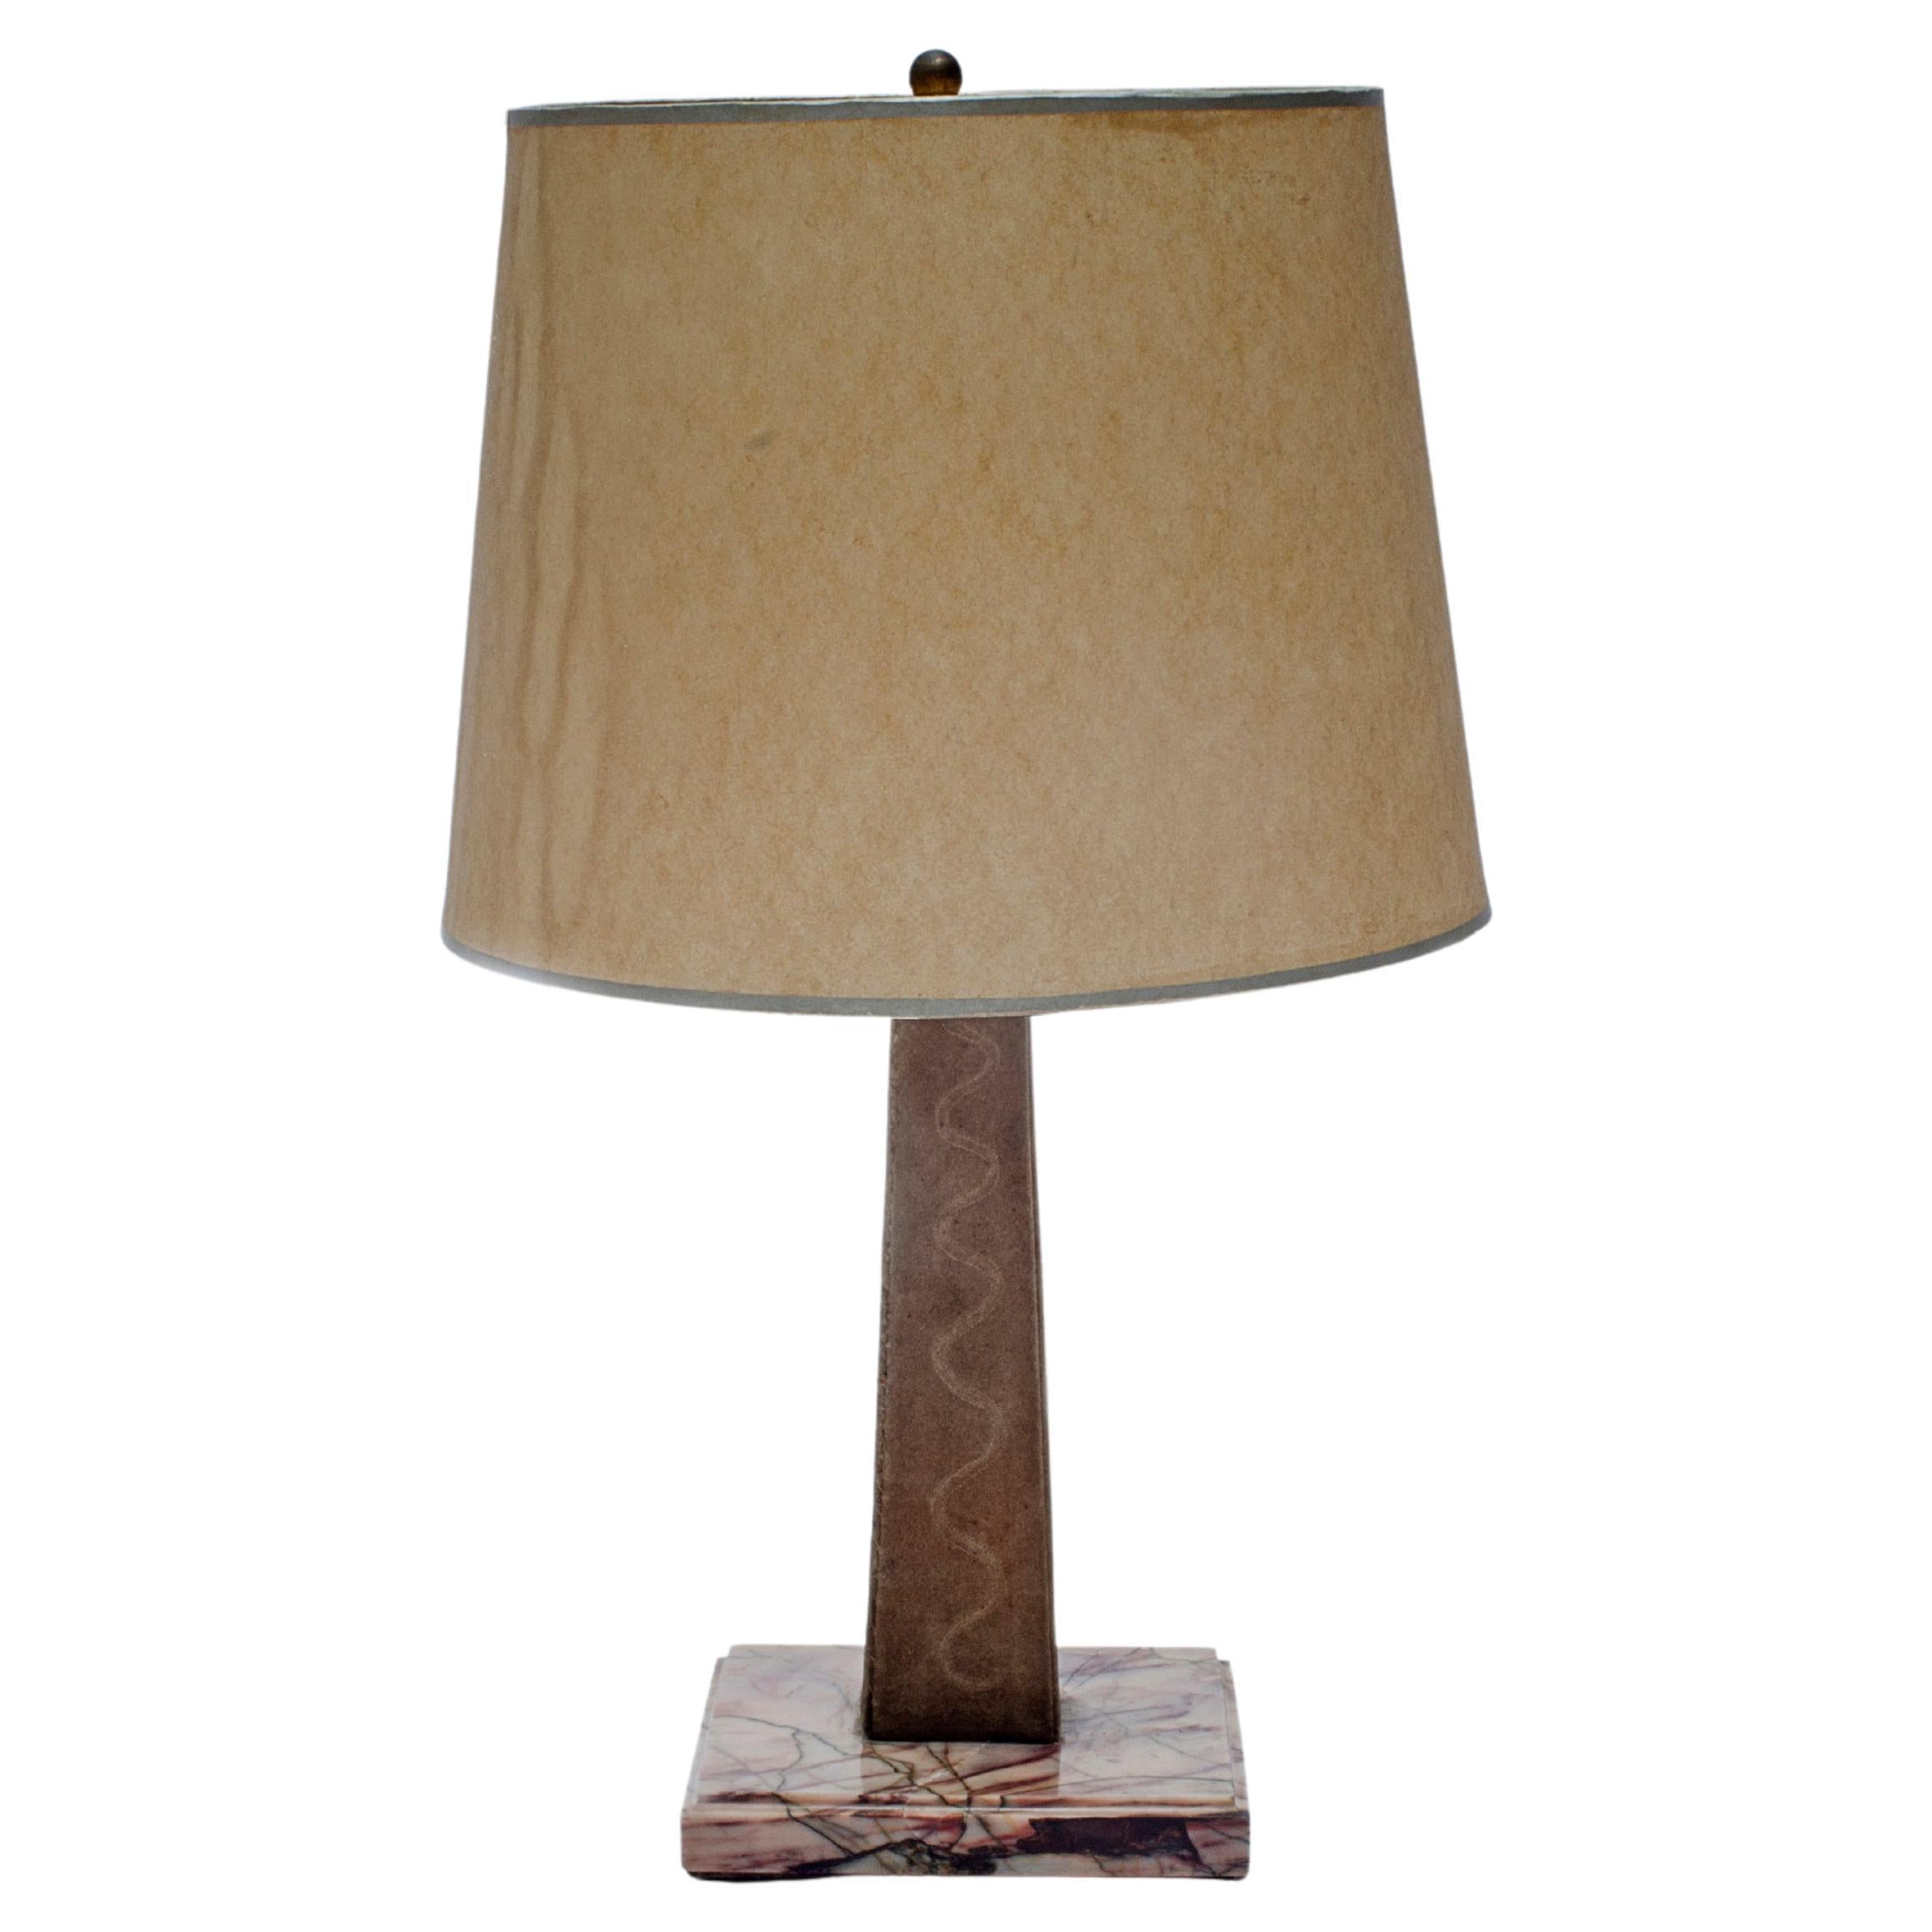 Antelope Leather Table Lamp by Comte